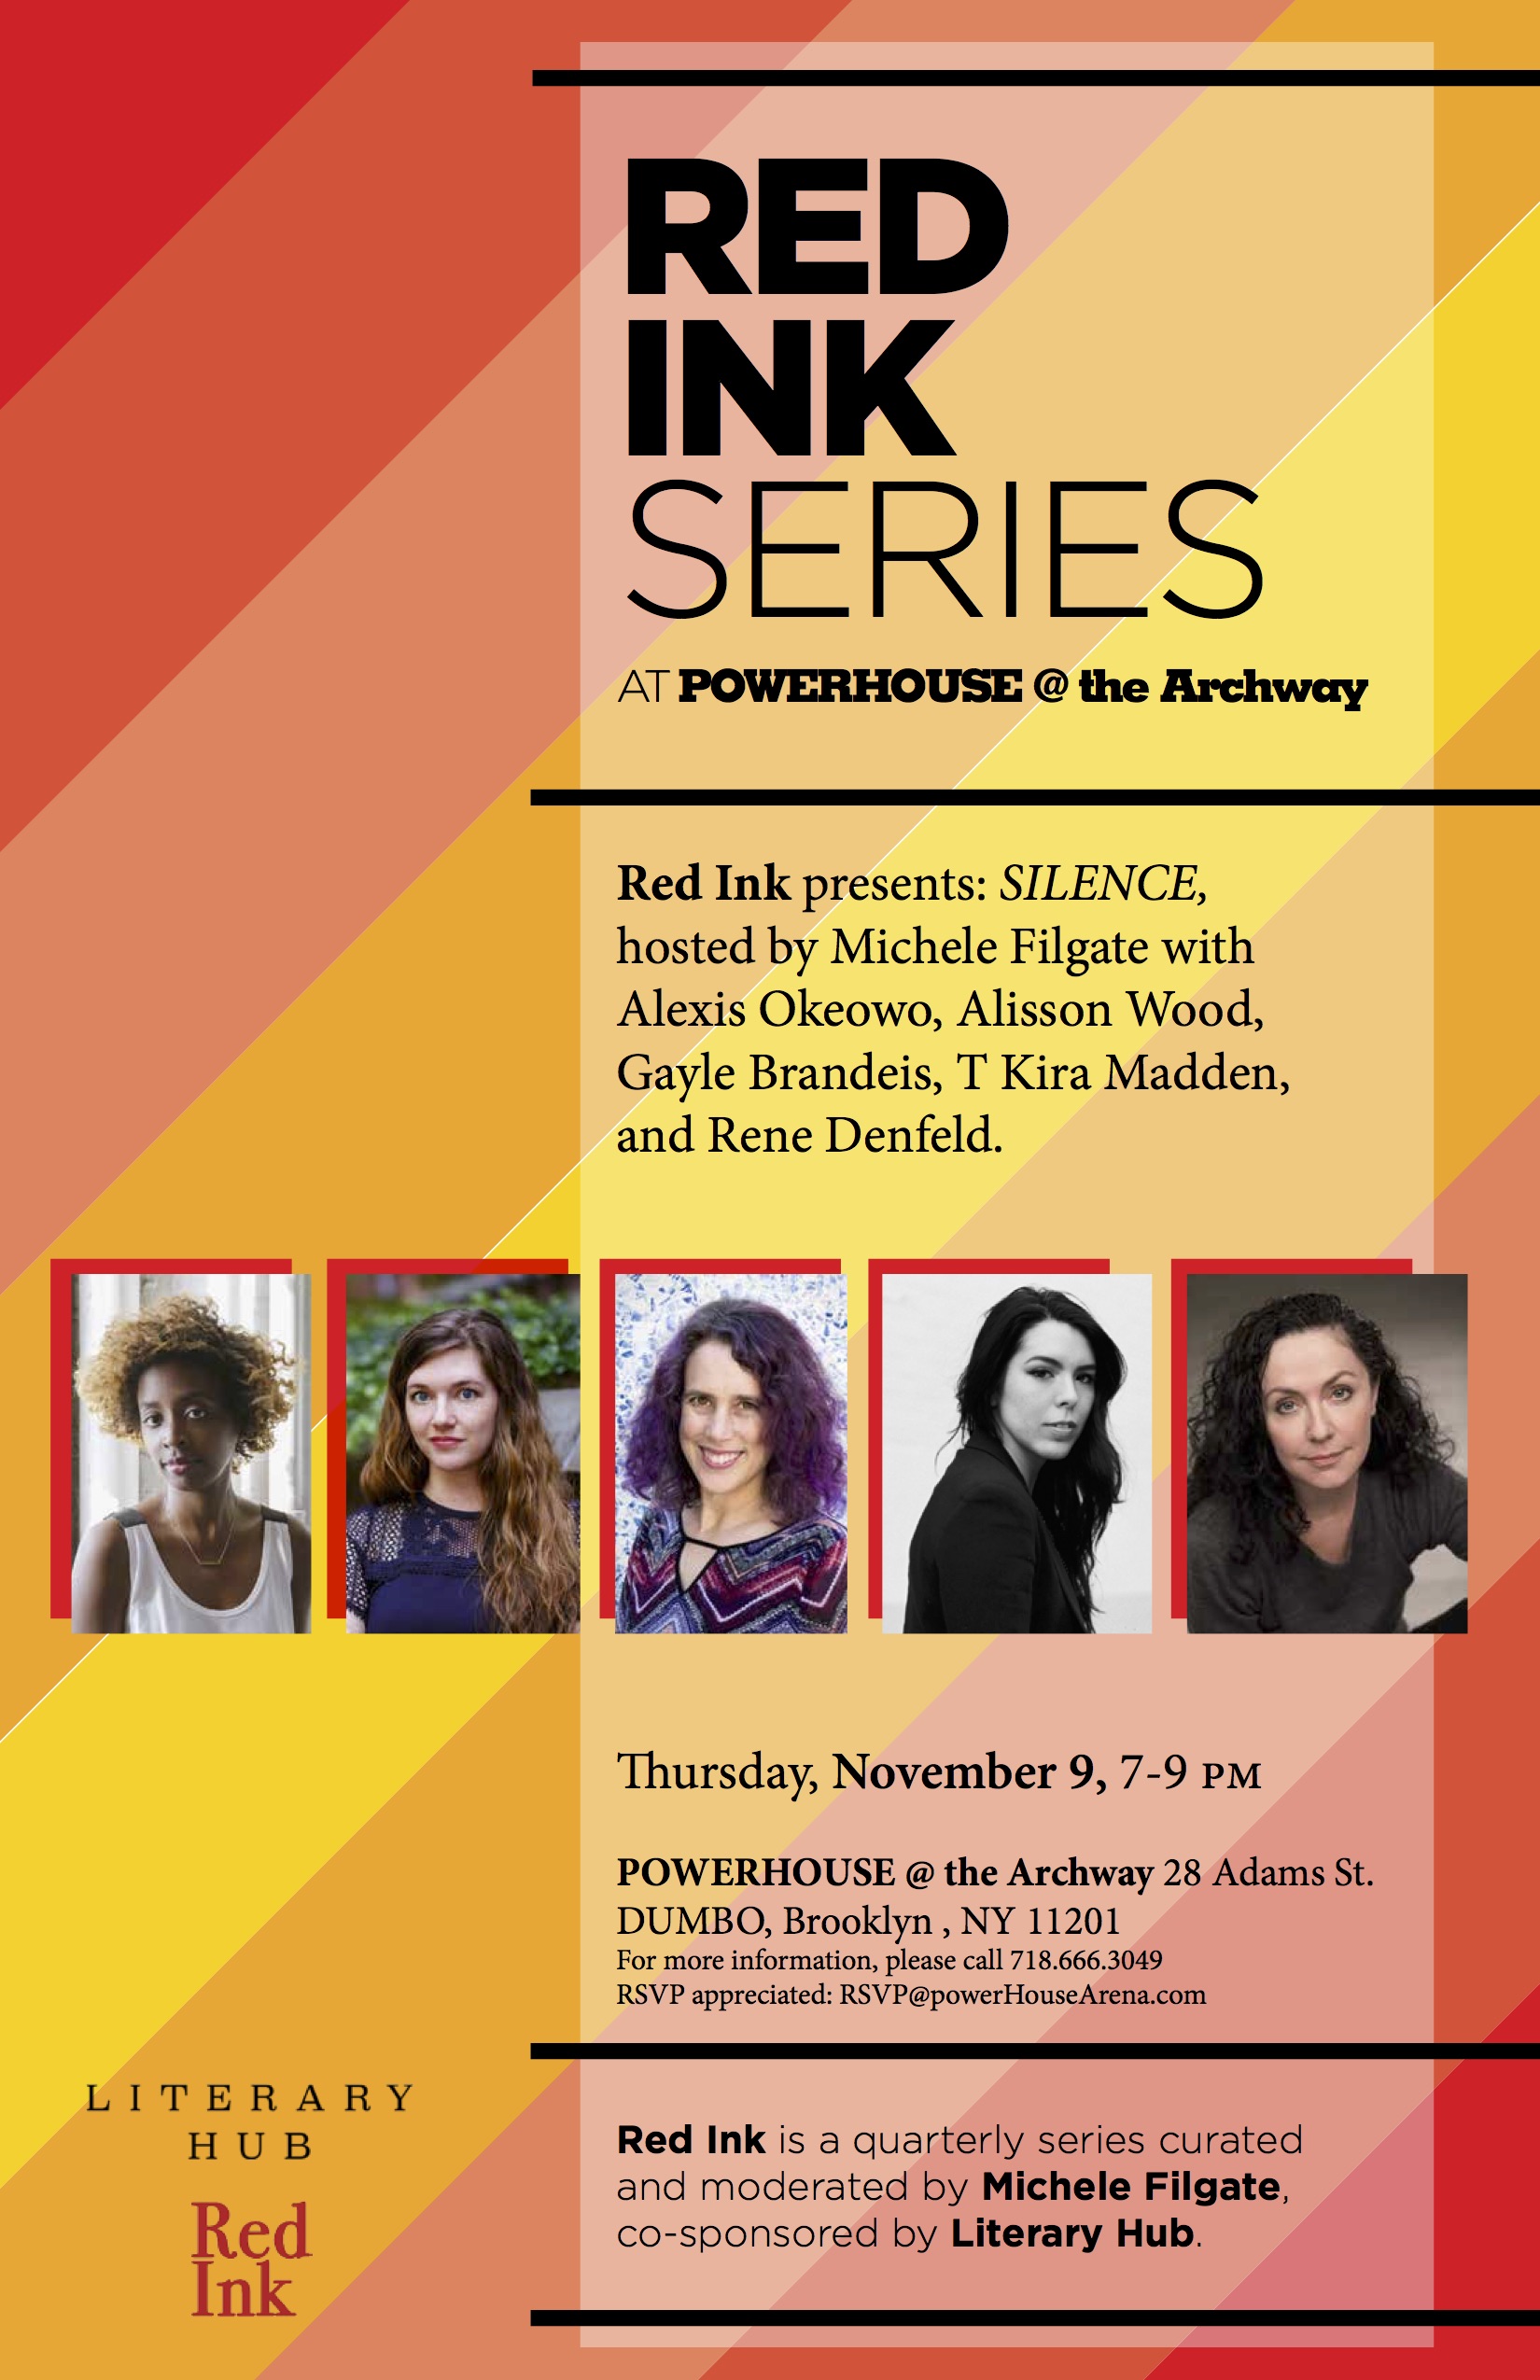 Red Ink Series: SILENCE, hosted by Michele Filgate with Gayle Brandeis, Alexis Okeowo, Rene Denfeld, Alisson Wood and T Kira Madden